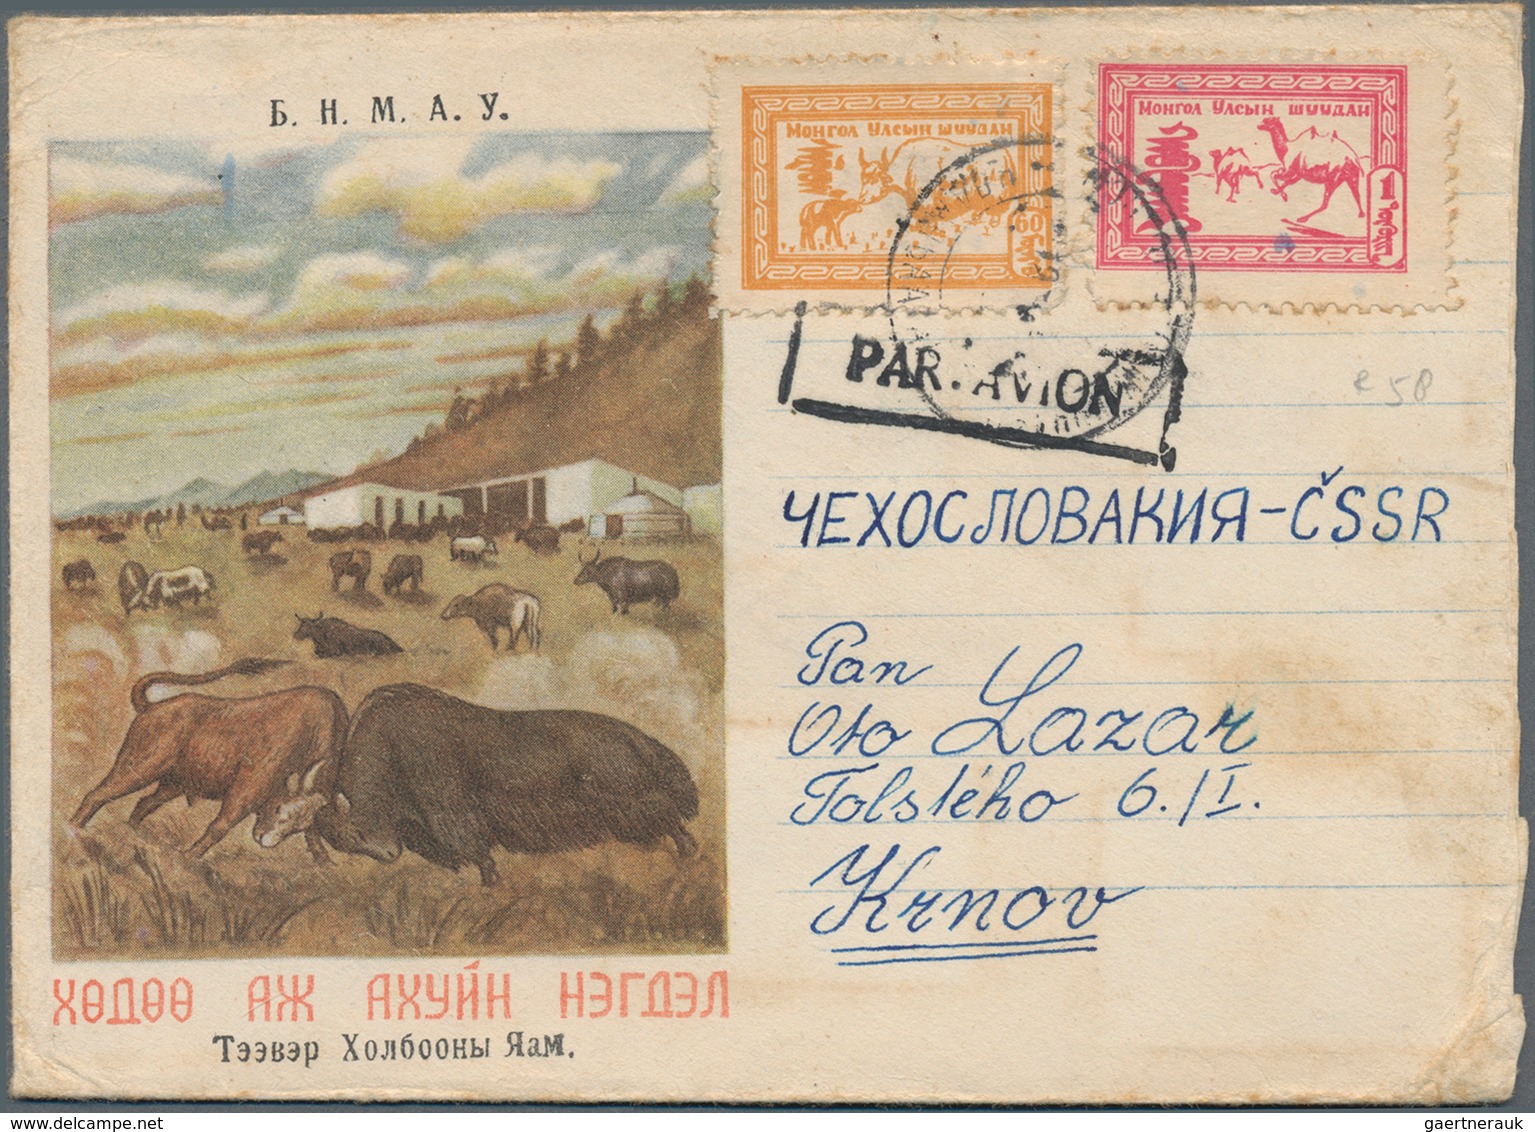 Mongolei: 1956/1961, 16 Covers To Europe All With Some Traces Of Usage. Very Scarce Offer. - Mongolia